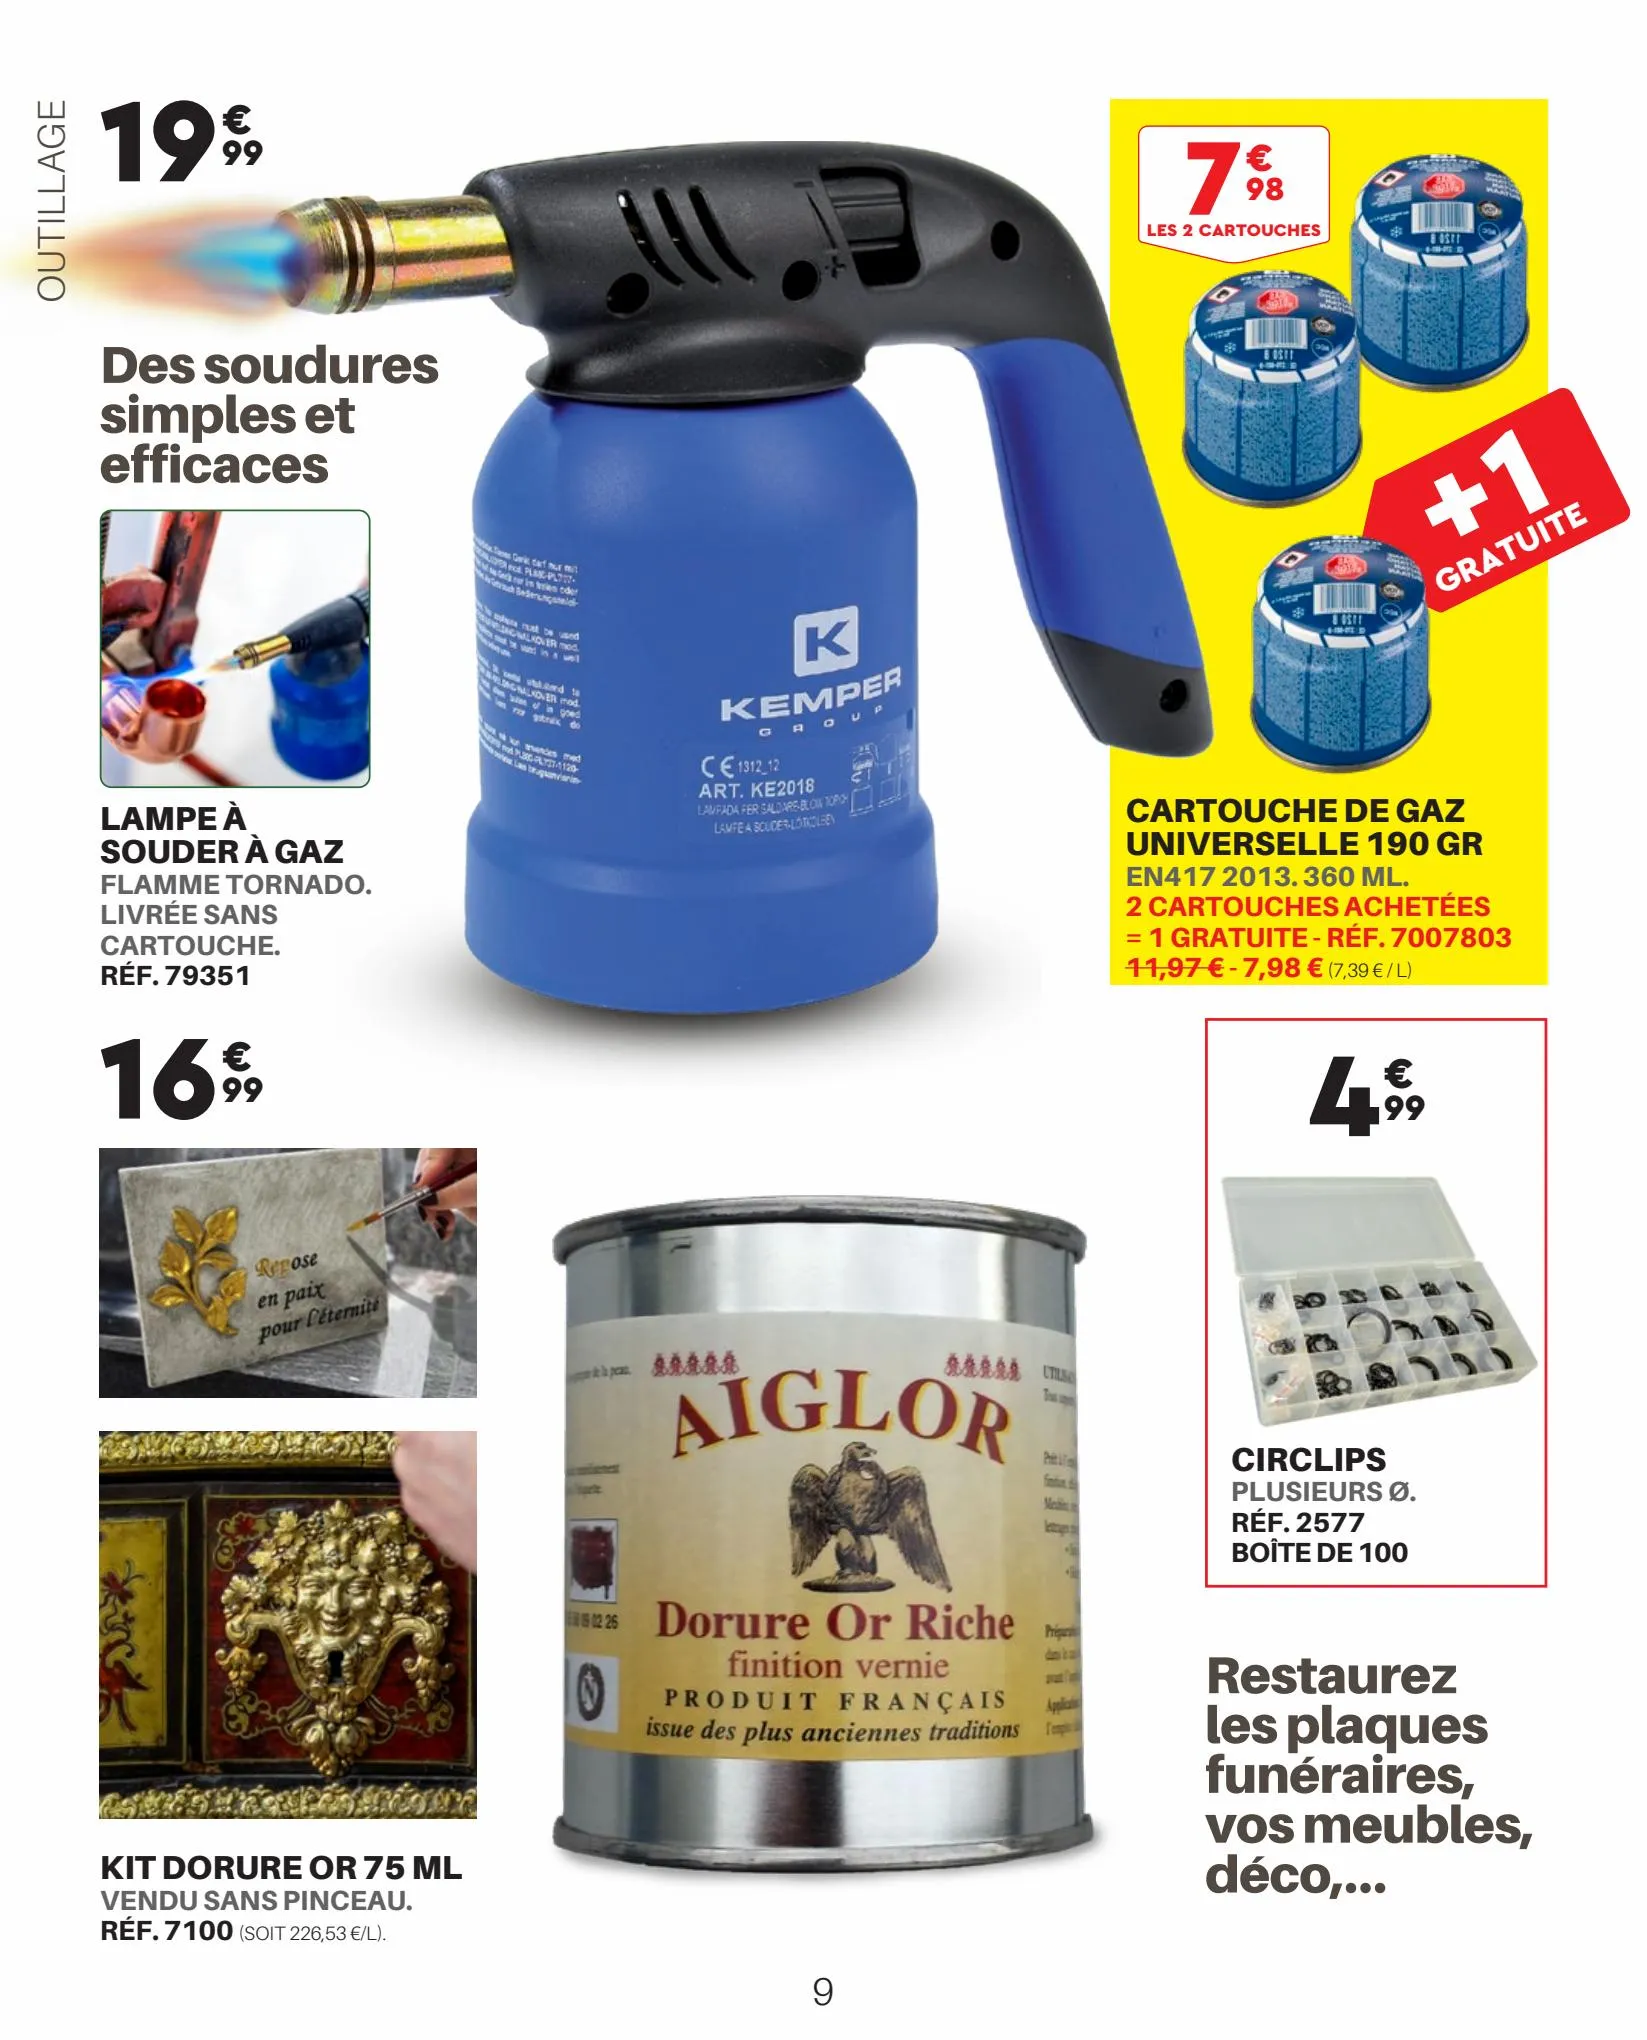 Catalogue AUTO OUTILLAGE LES OFFERES SPECIALES, page 00009